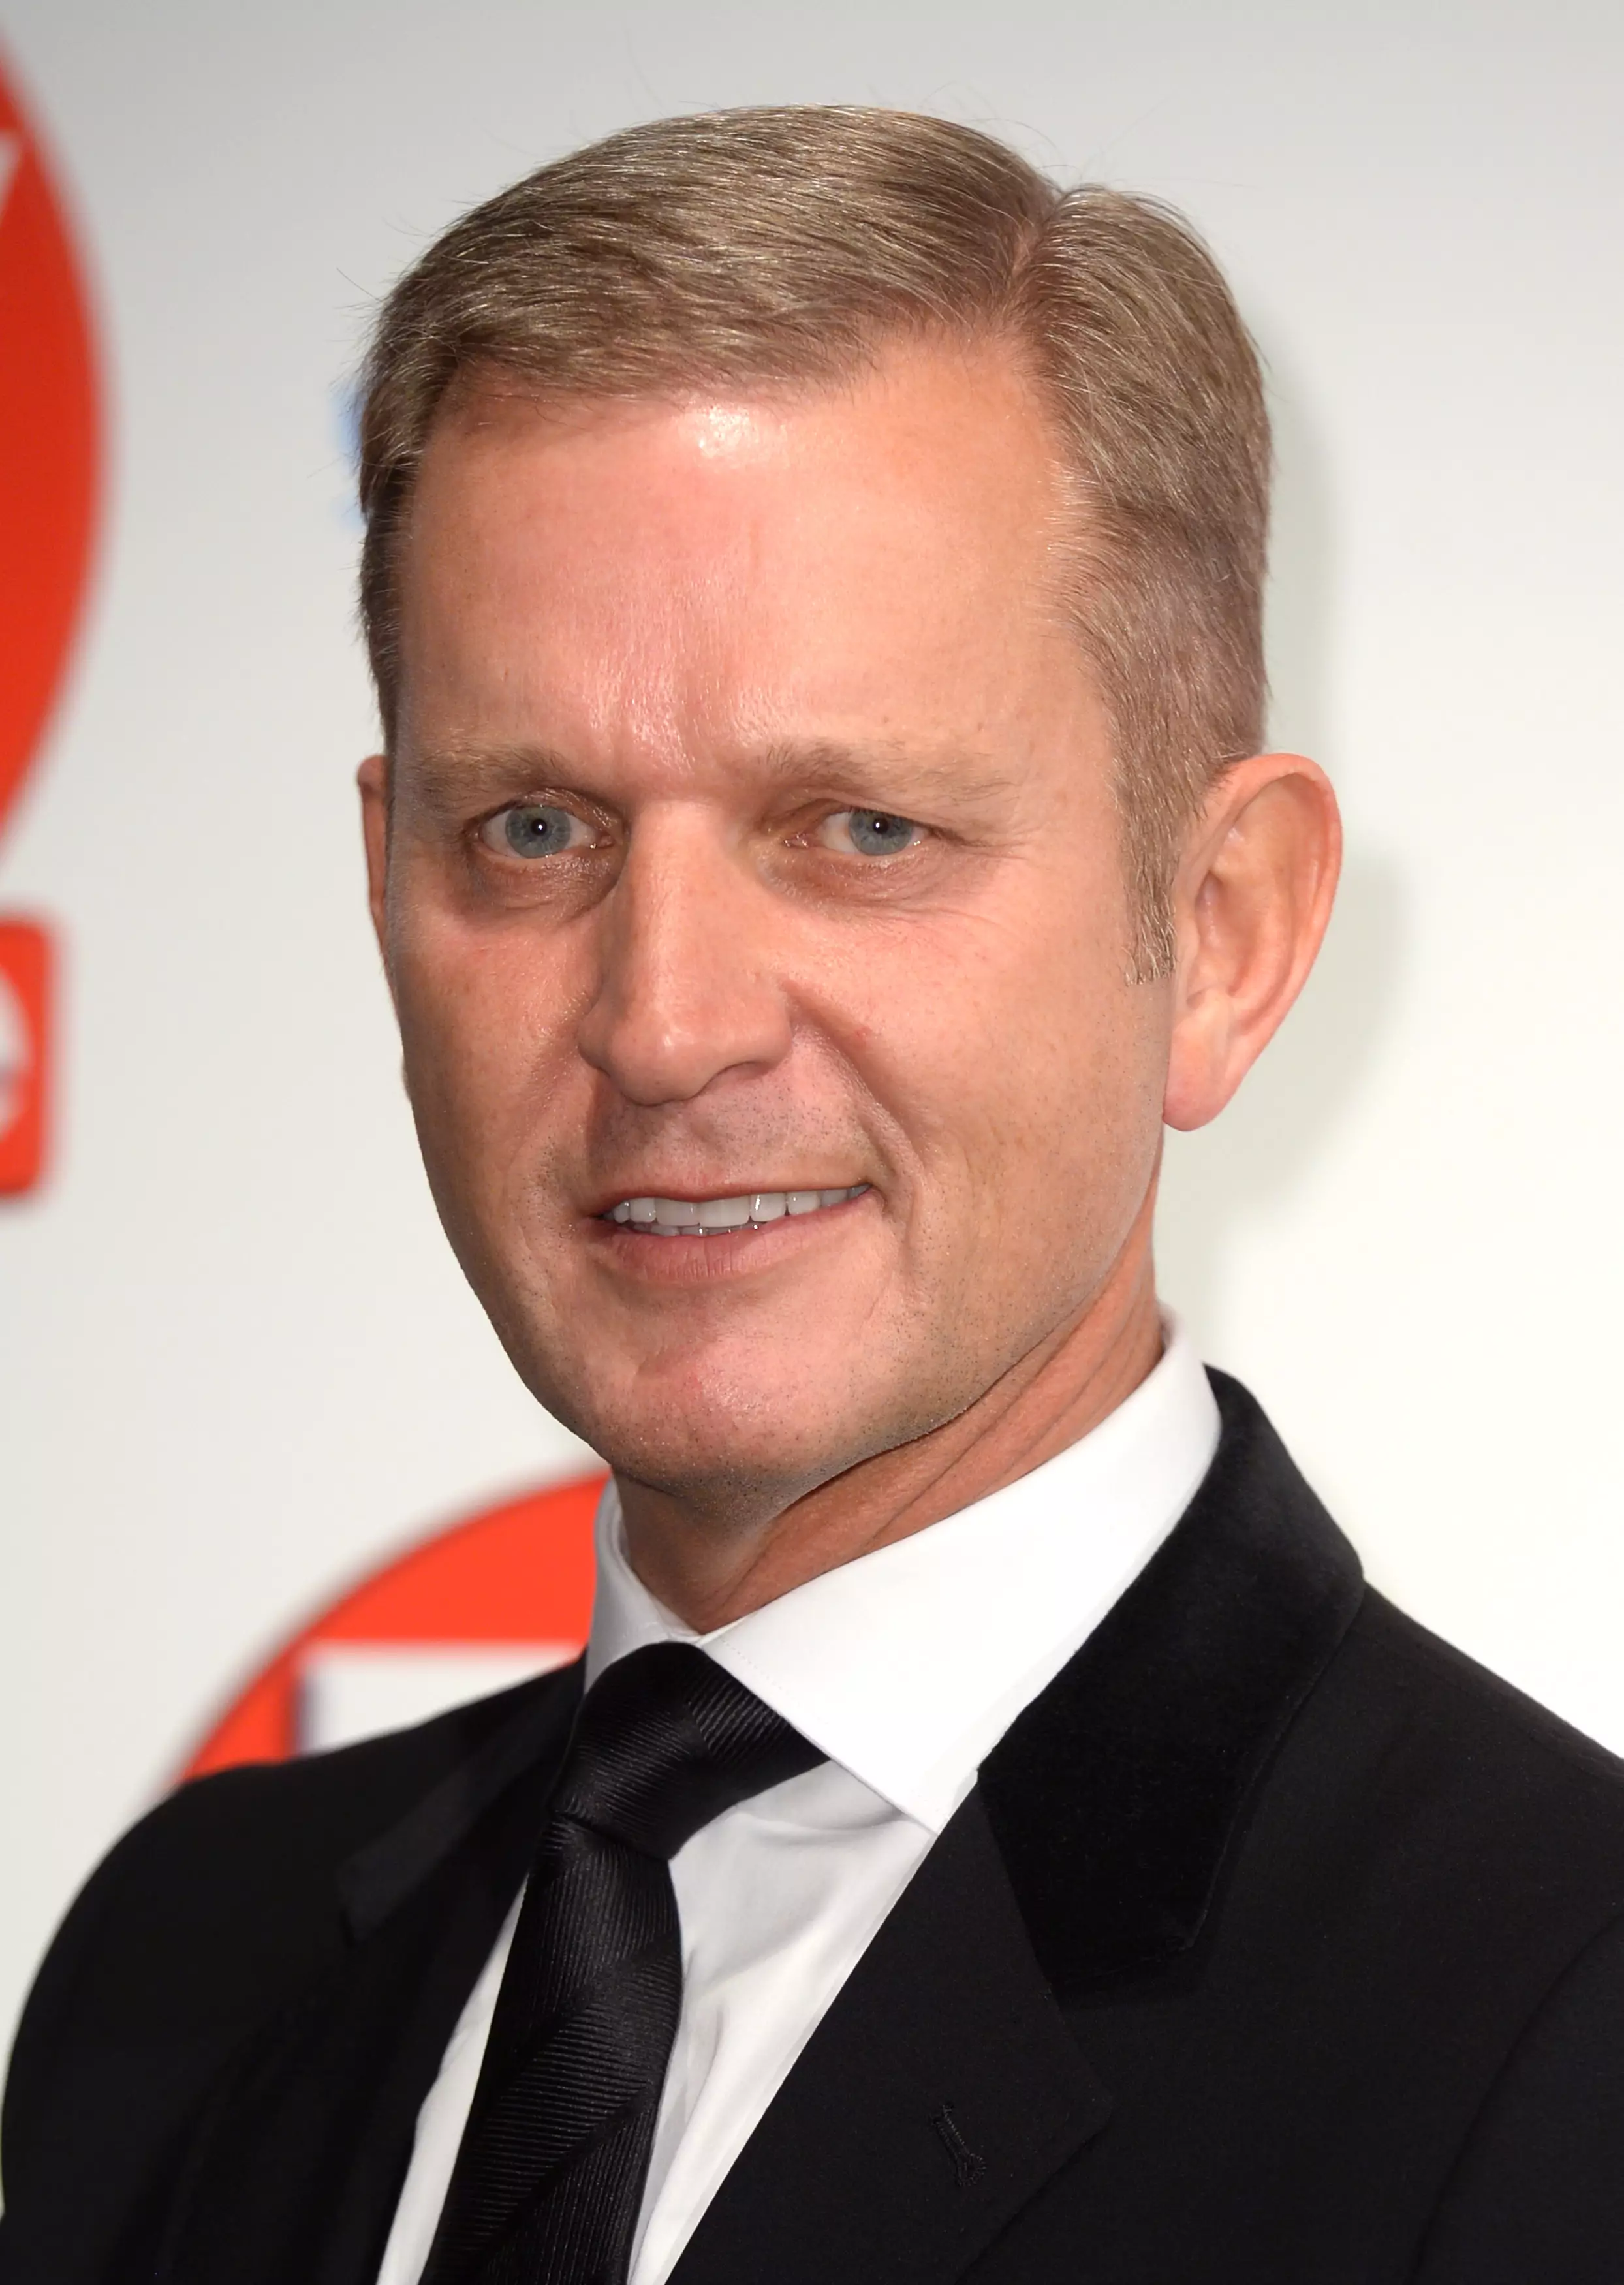 ITV bosses axed The Jeremy Kyle Show earlier this year.